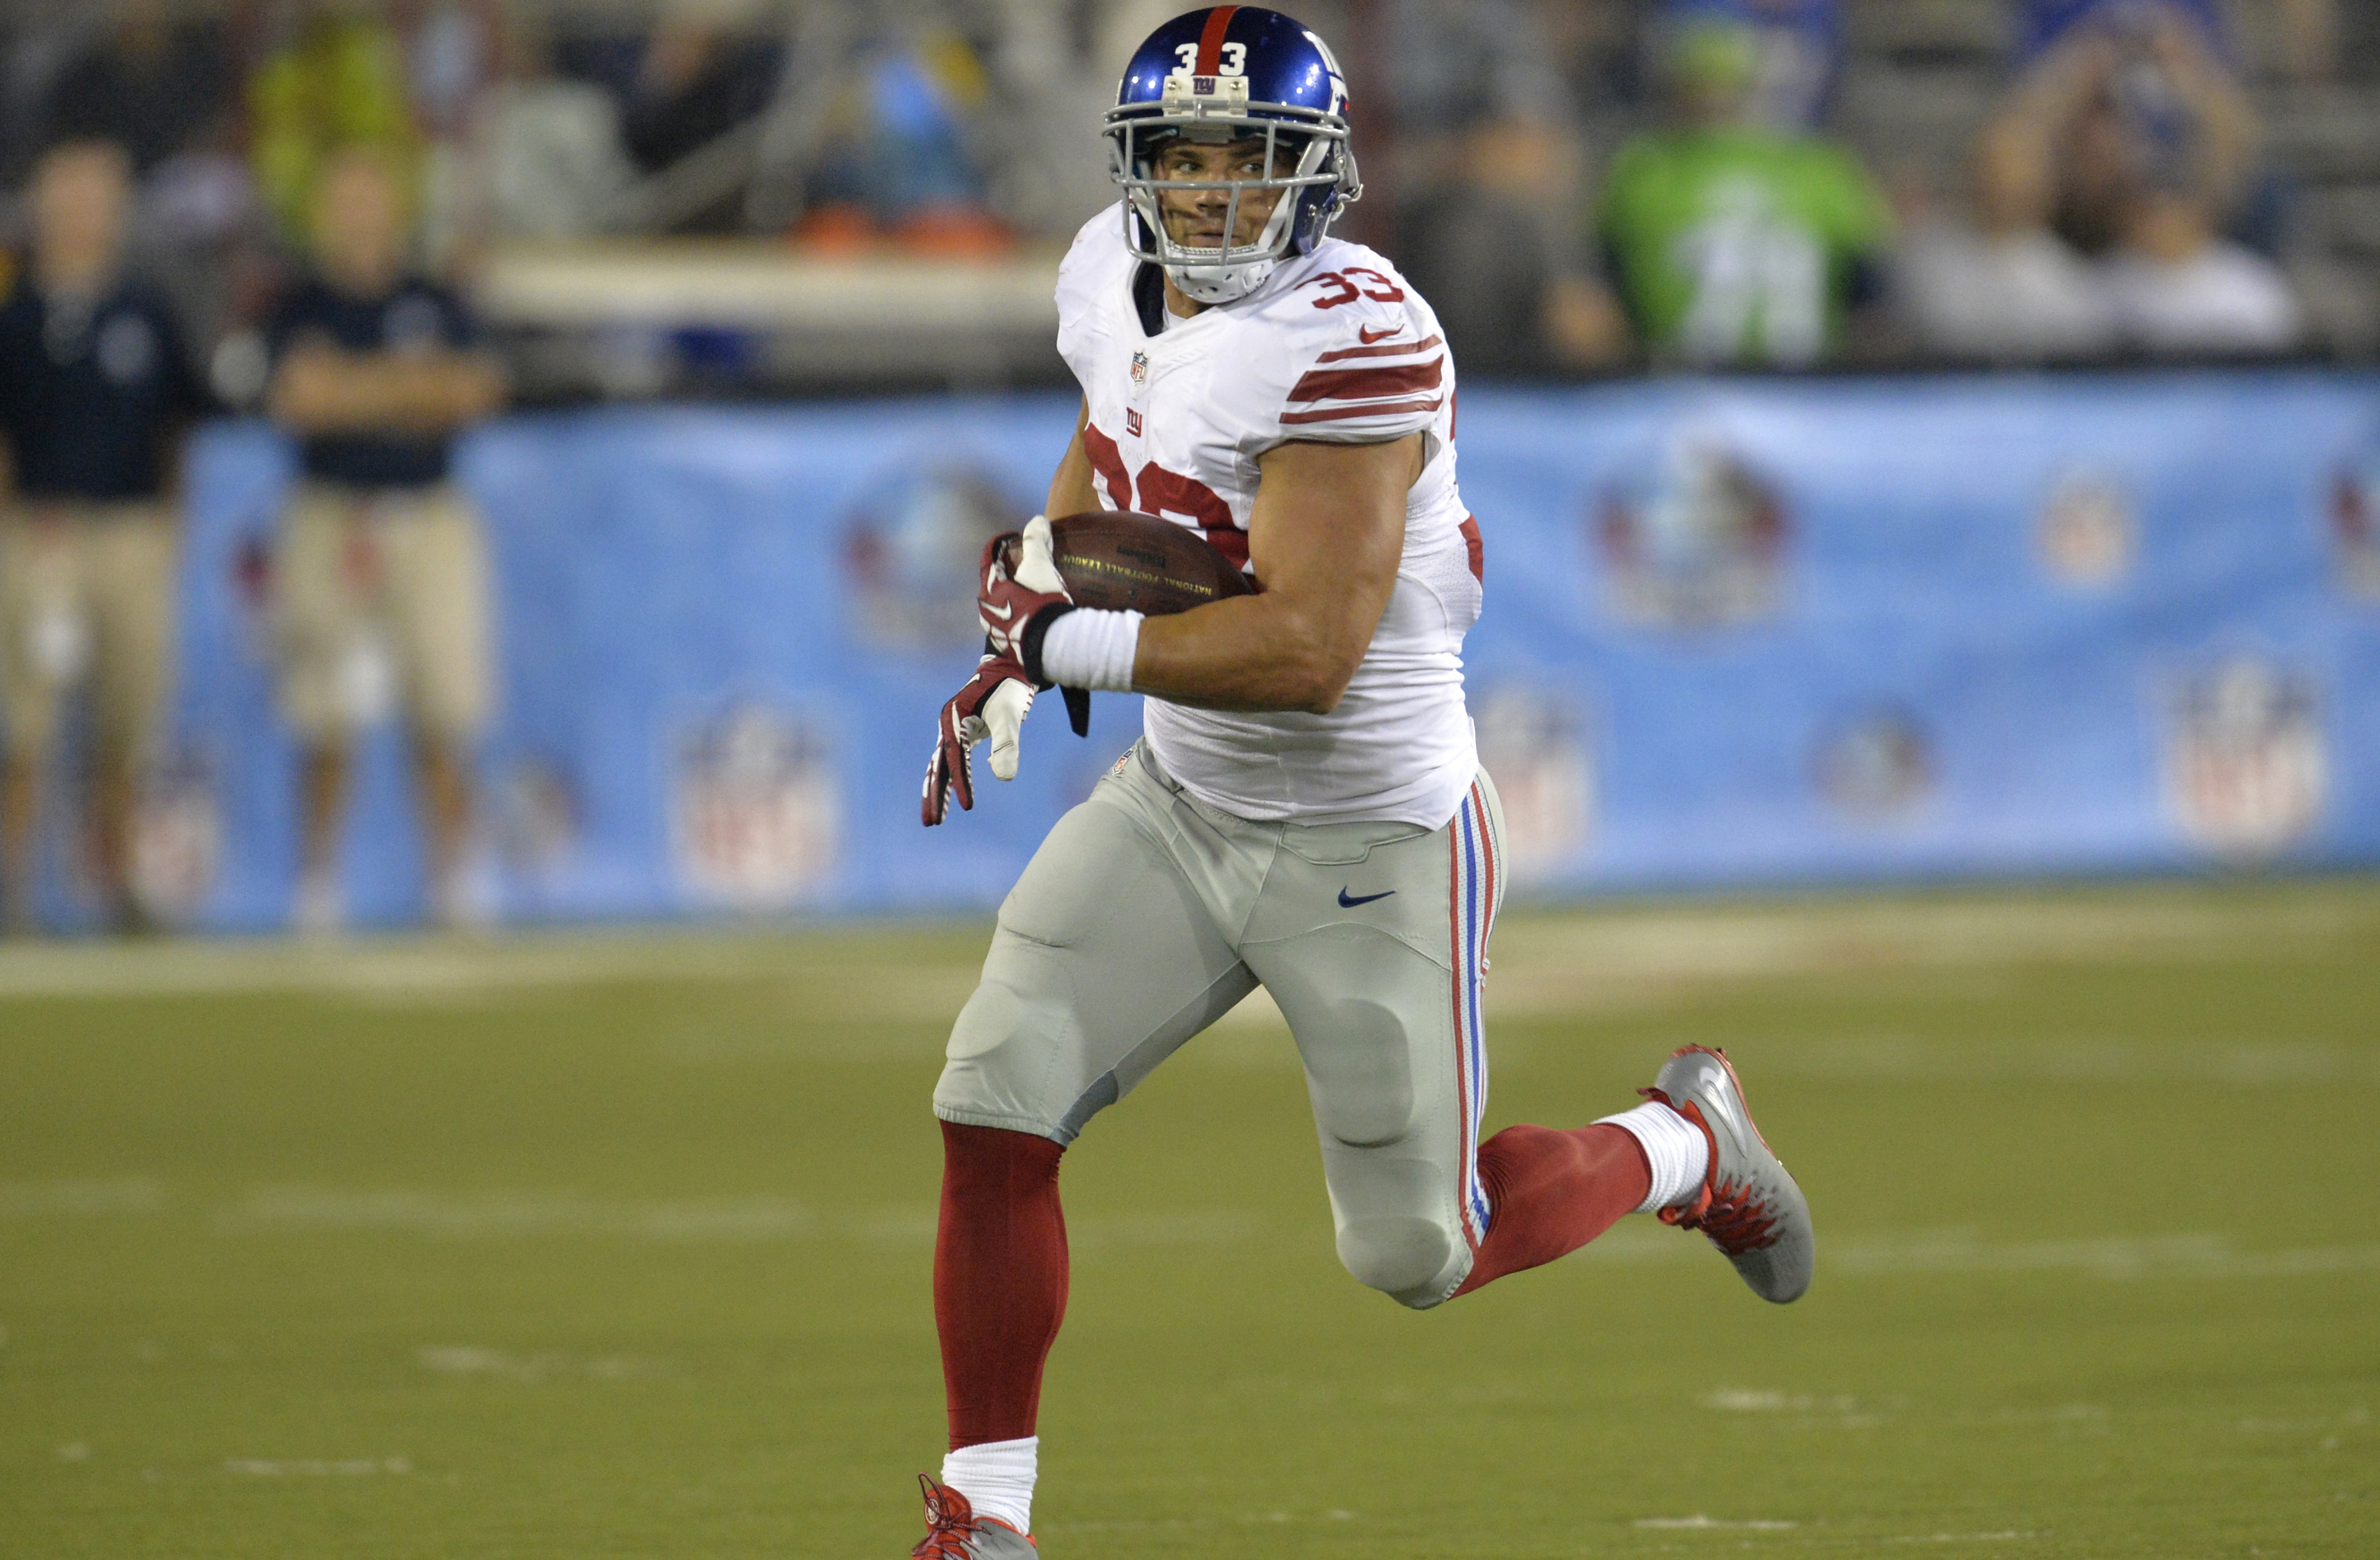 Peyton Hillis off a ventilator after swimming accident: girlfriend